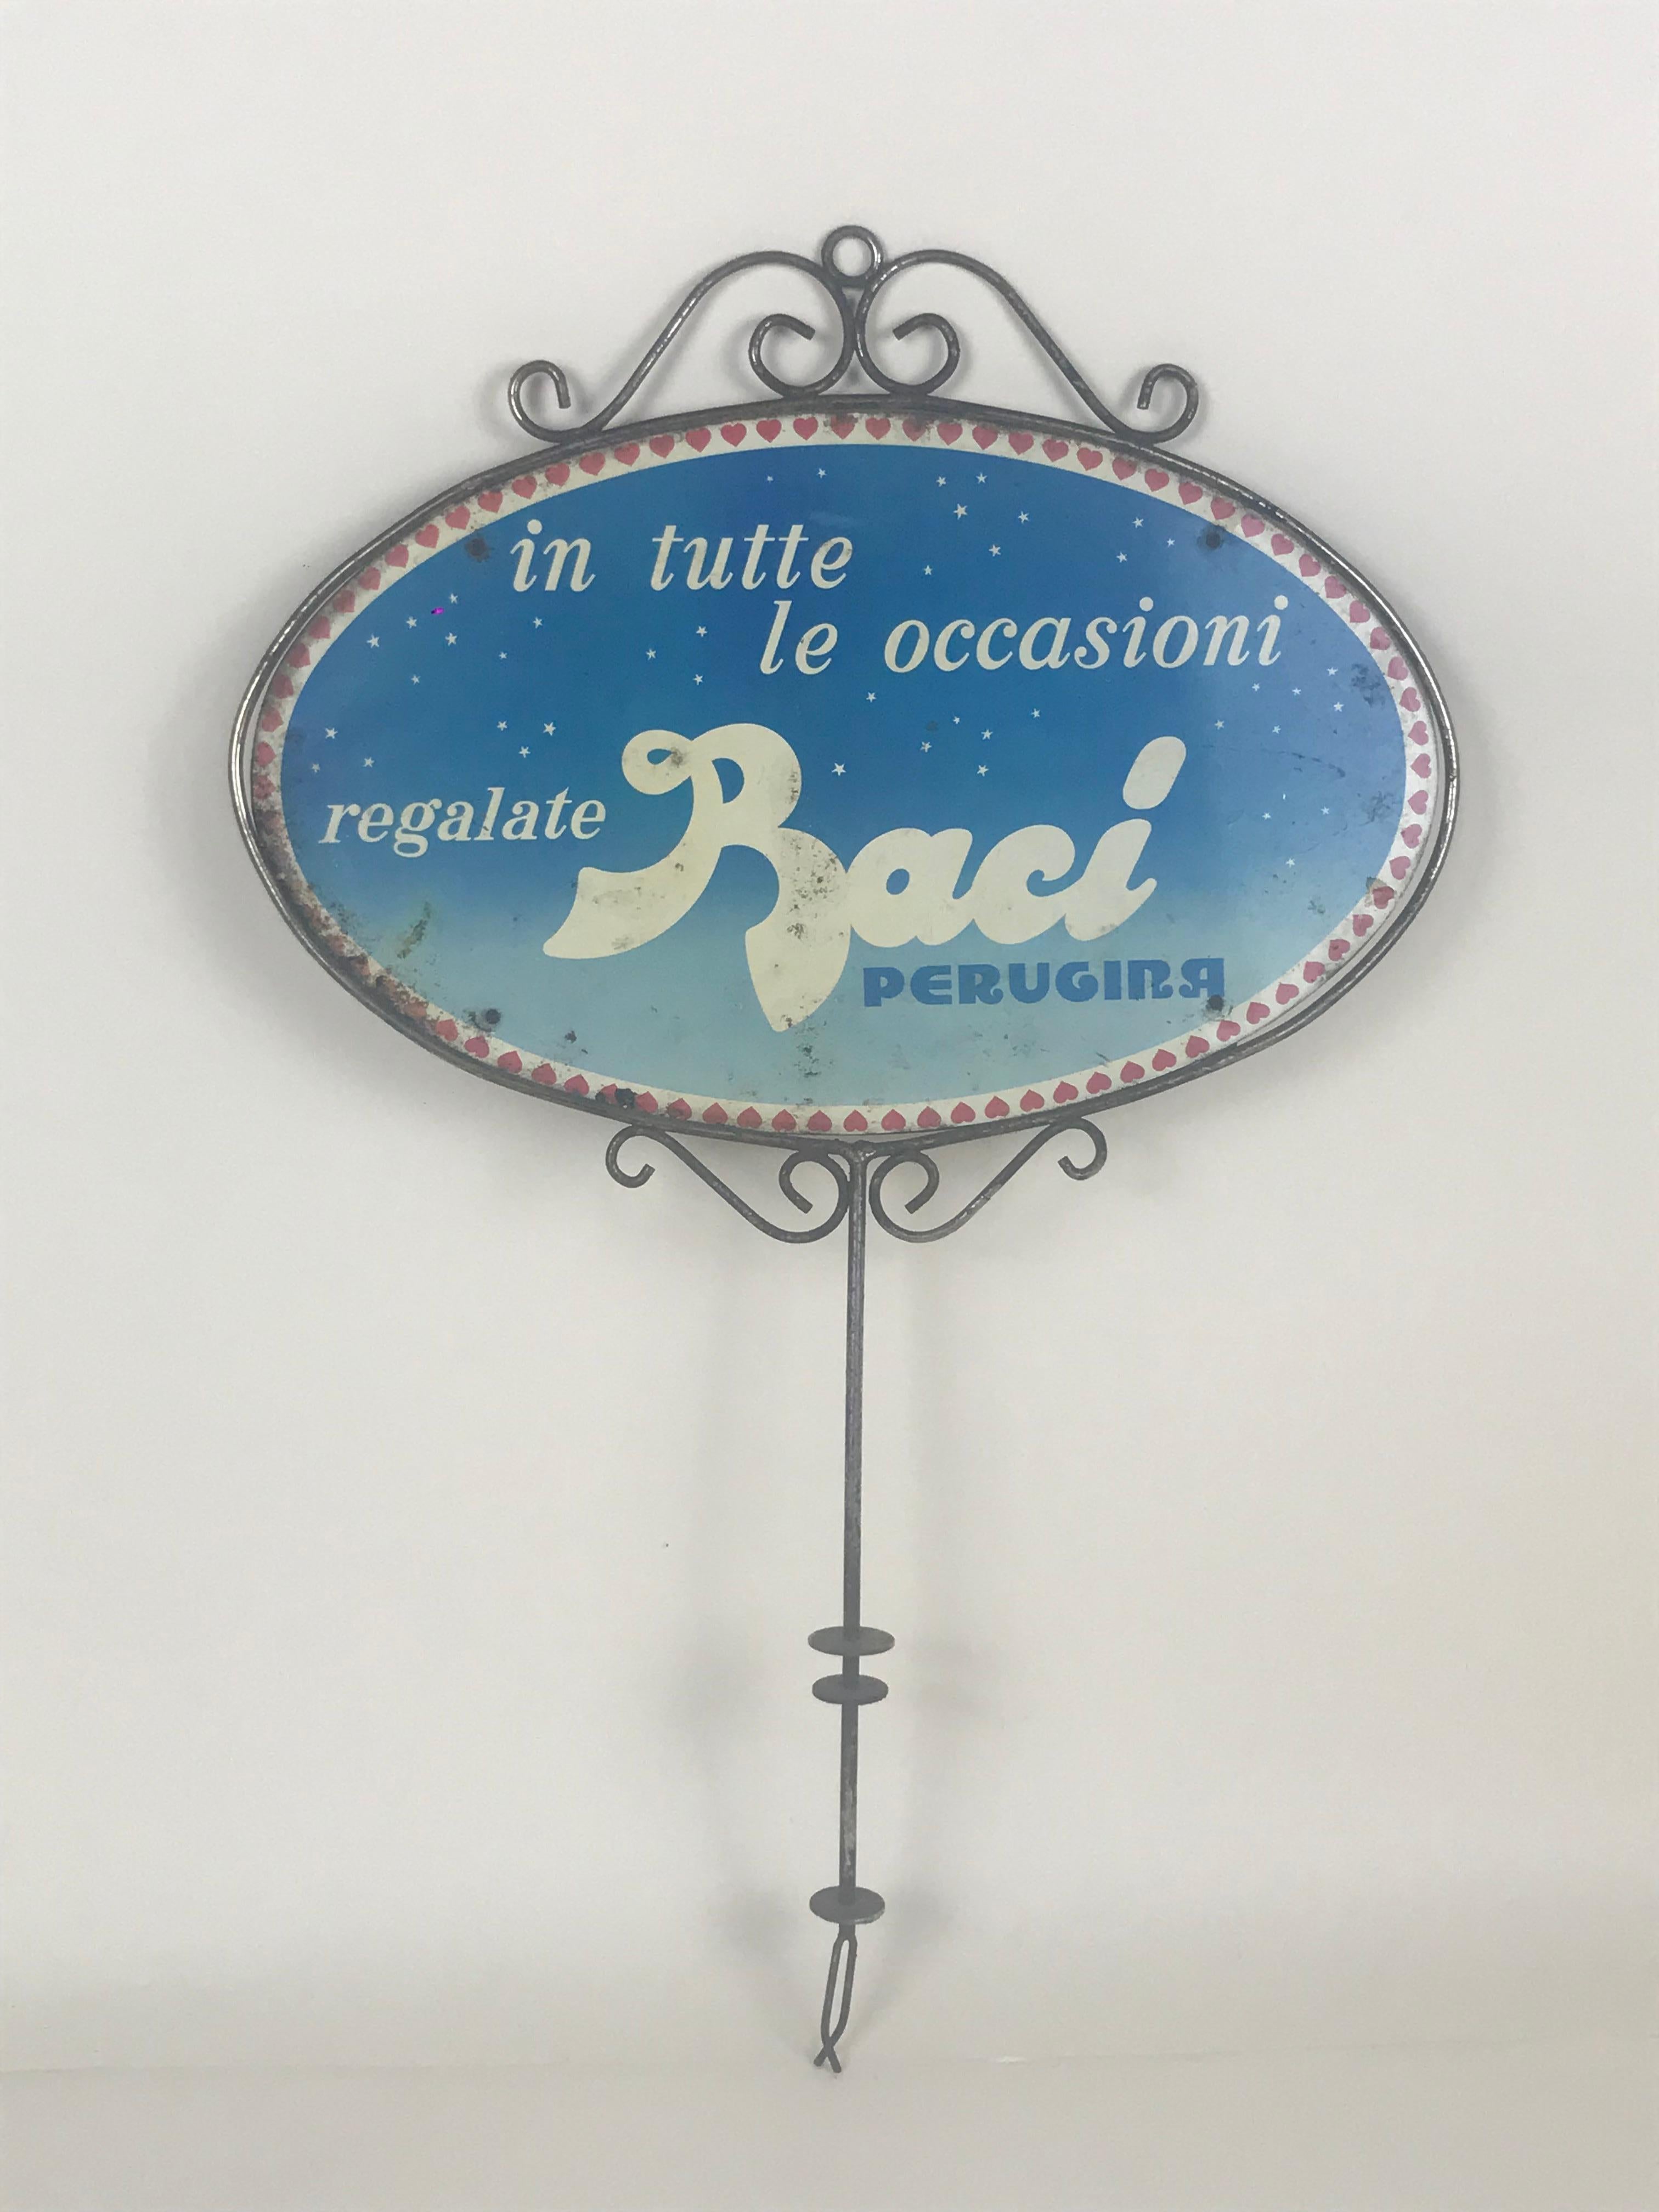 1980s vintage Baci Perugina short advertising pole with two screen printed oval signs (front and back). 

This object was displayed on top of product dispenser in various commercial venues.

Each sign runs the slogan: 